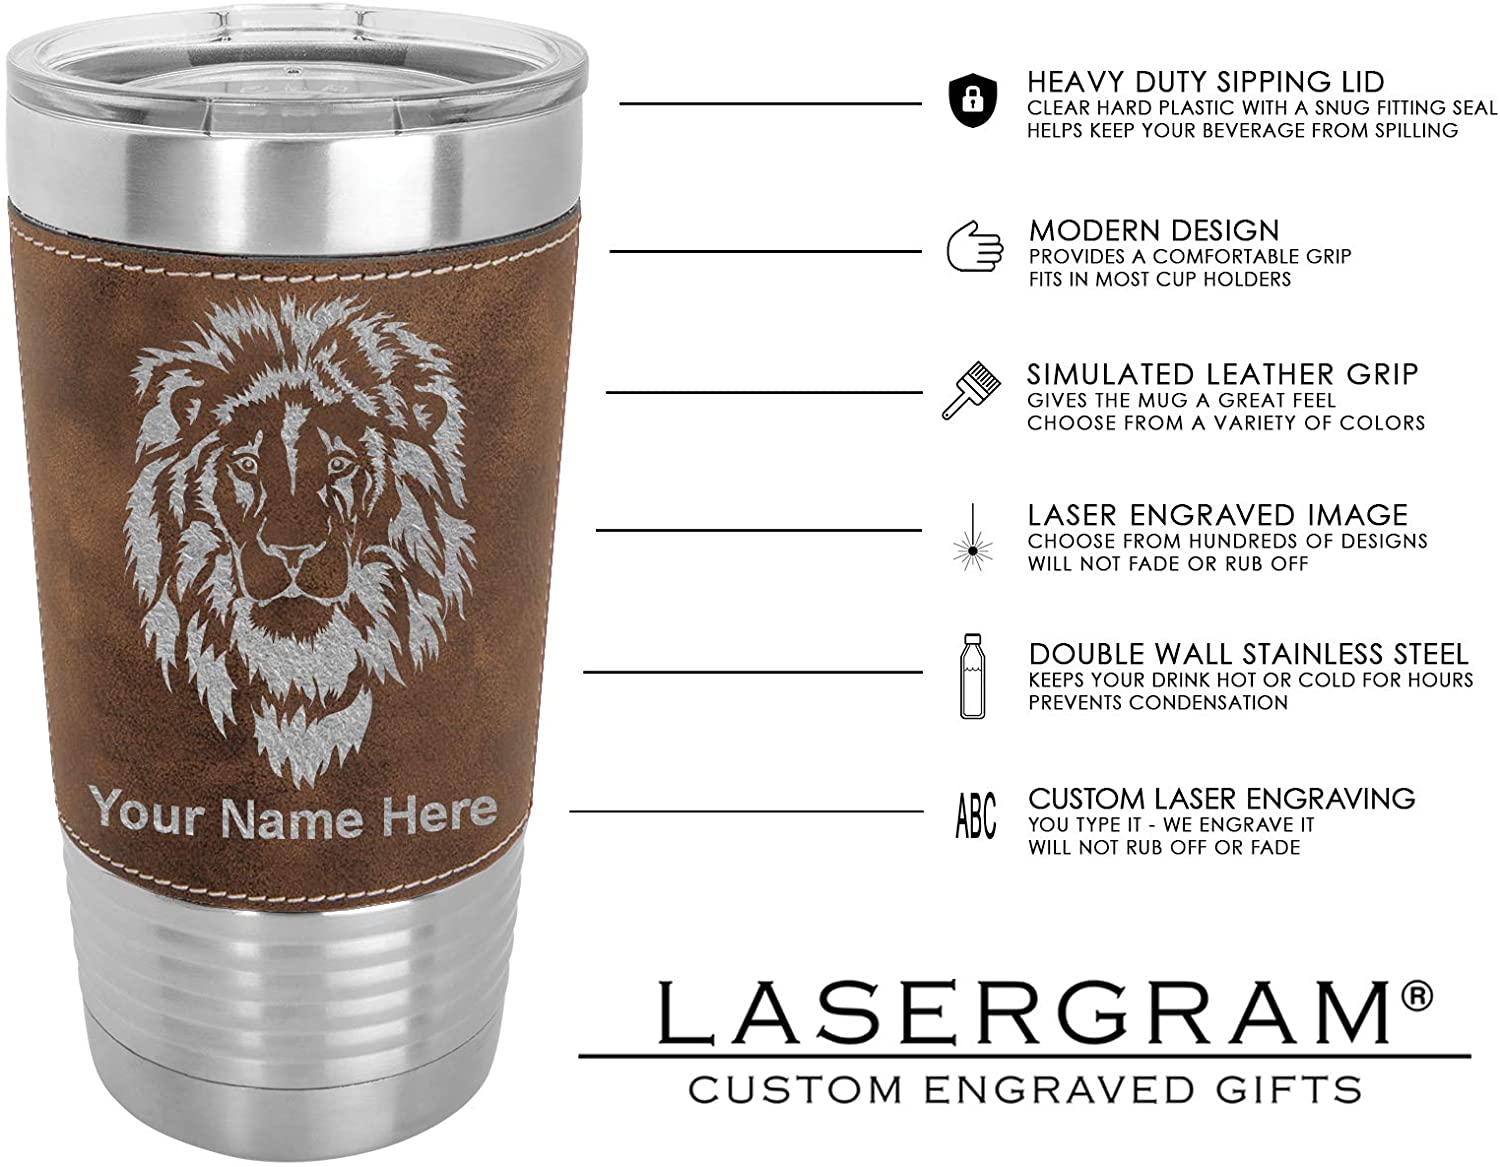 20oz Faux Leather Tumbler Mug, ATC Air Traffic Controller, Personalized Engraving Included - LaserGram Custom Engraved Gifts